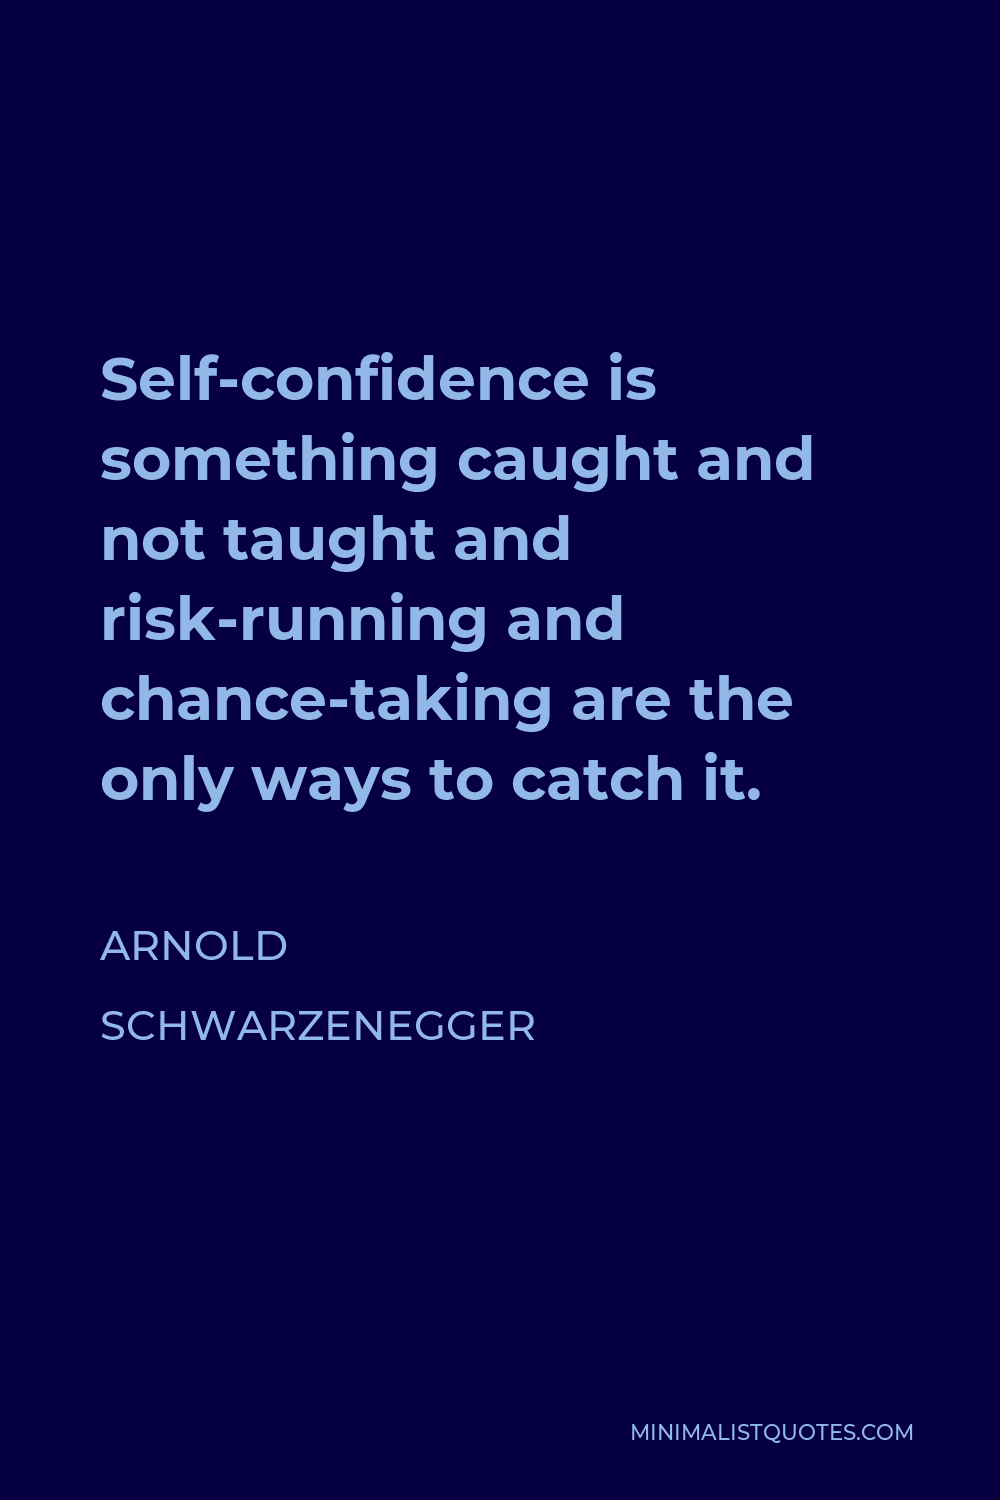 Arnold Schwarzenegger Quote - Self-confidence is something caught and not taught and risk-running and chance-taking are the only ways to catch it.